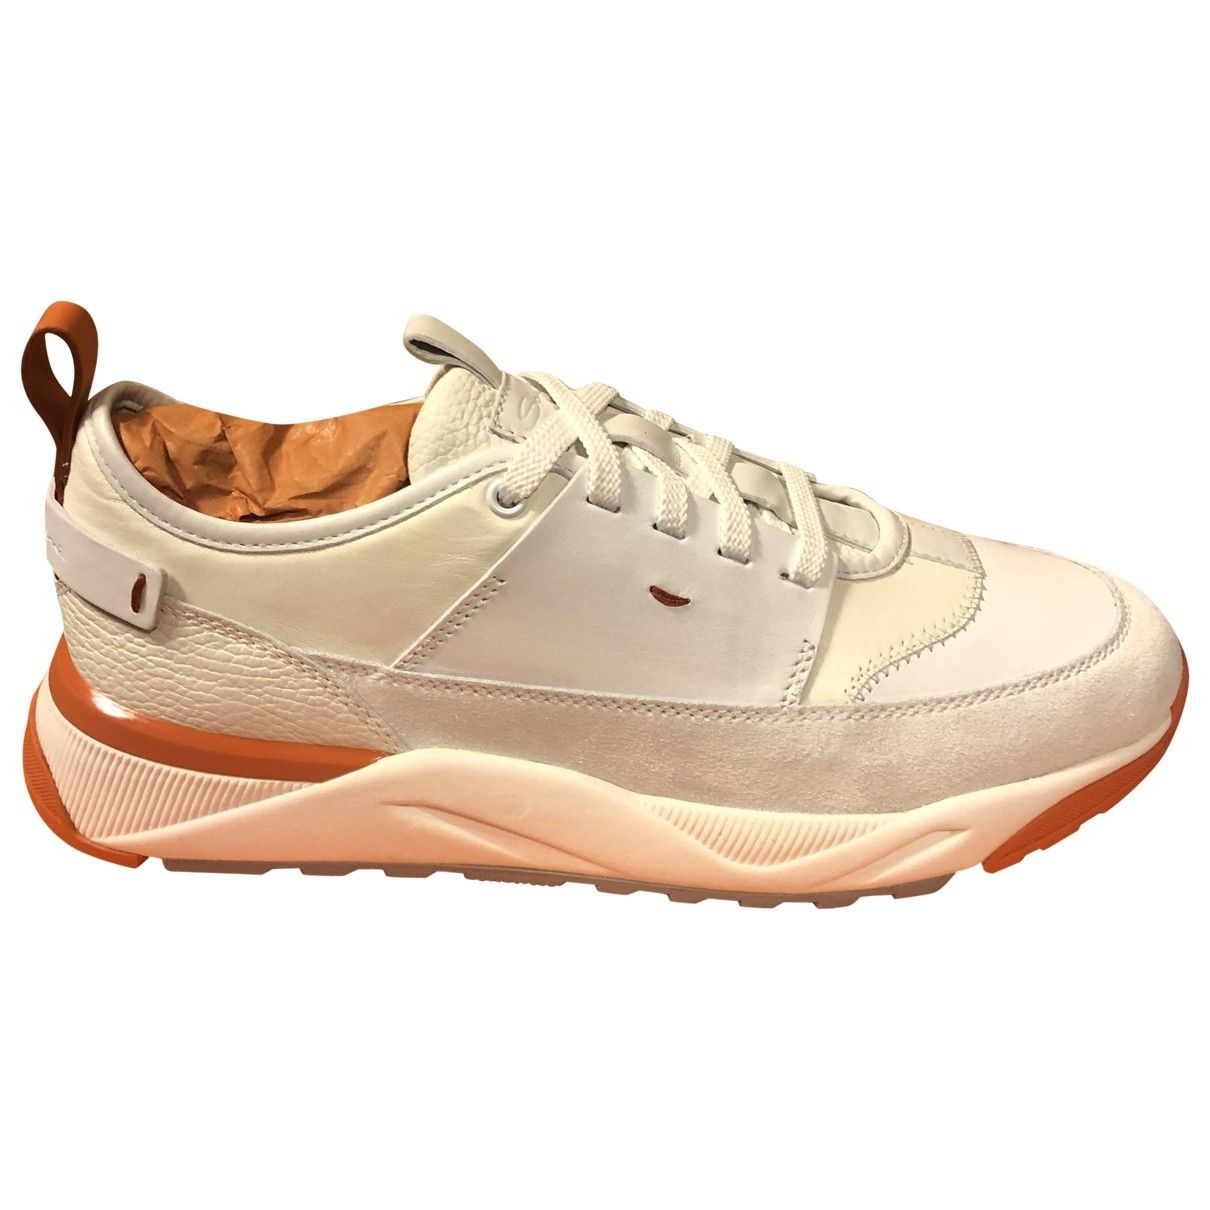 Trainers Santoni White size 8 UK in Suede - 9498156